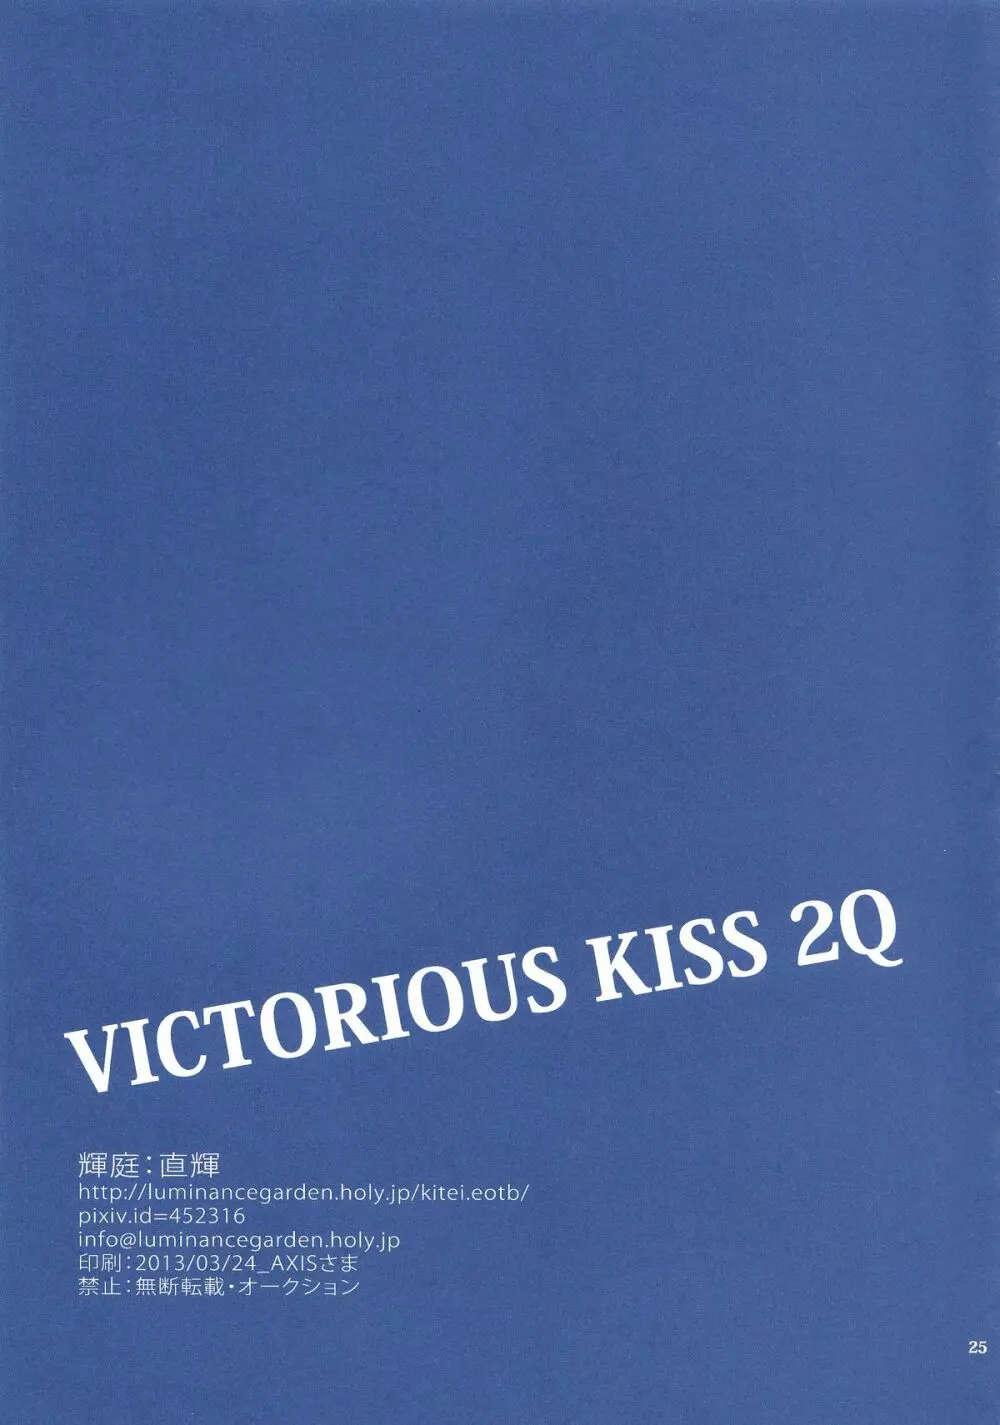 VICTORIOUS KISS 2Q 24ページ